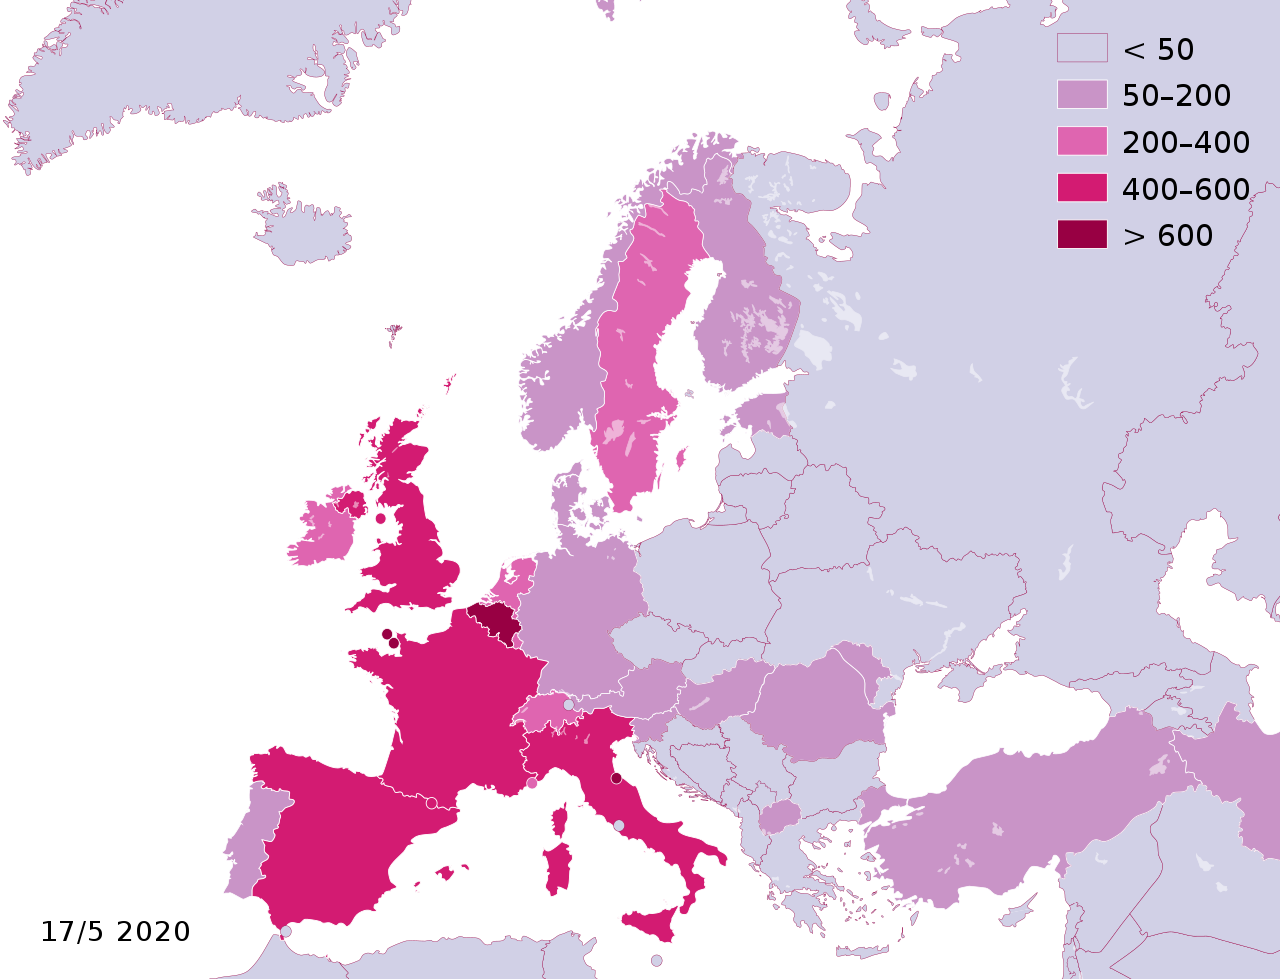 1280px-Persons_died_due_to_coronavirus_COVID-19_per_capita_in_Europe.svg